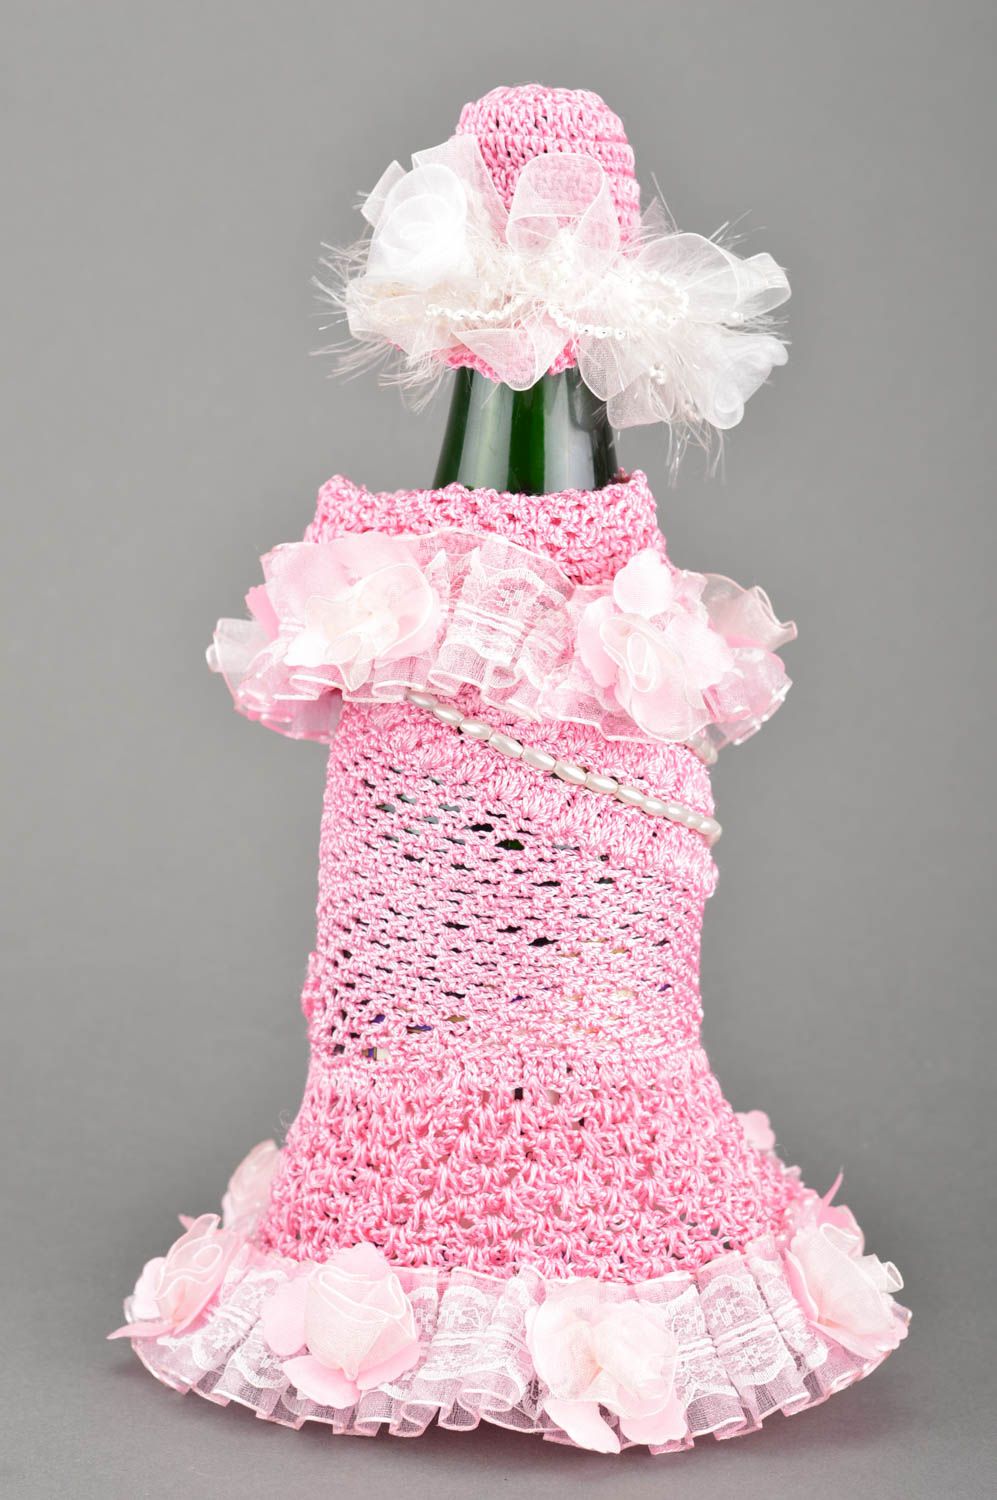 Handmade decorative bottle cozy crocheted pink dress with lacy hat cover photo 5